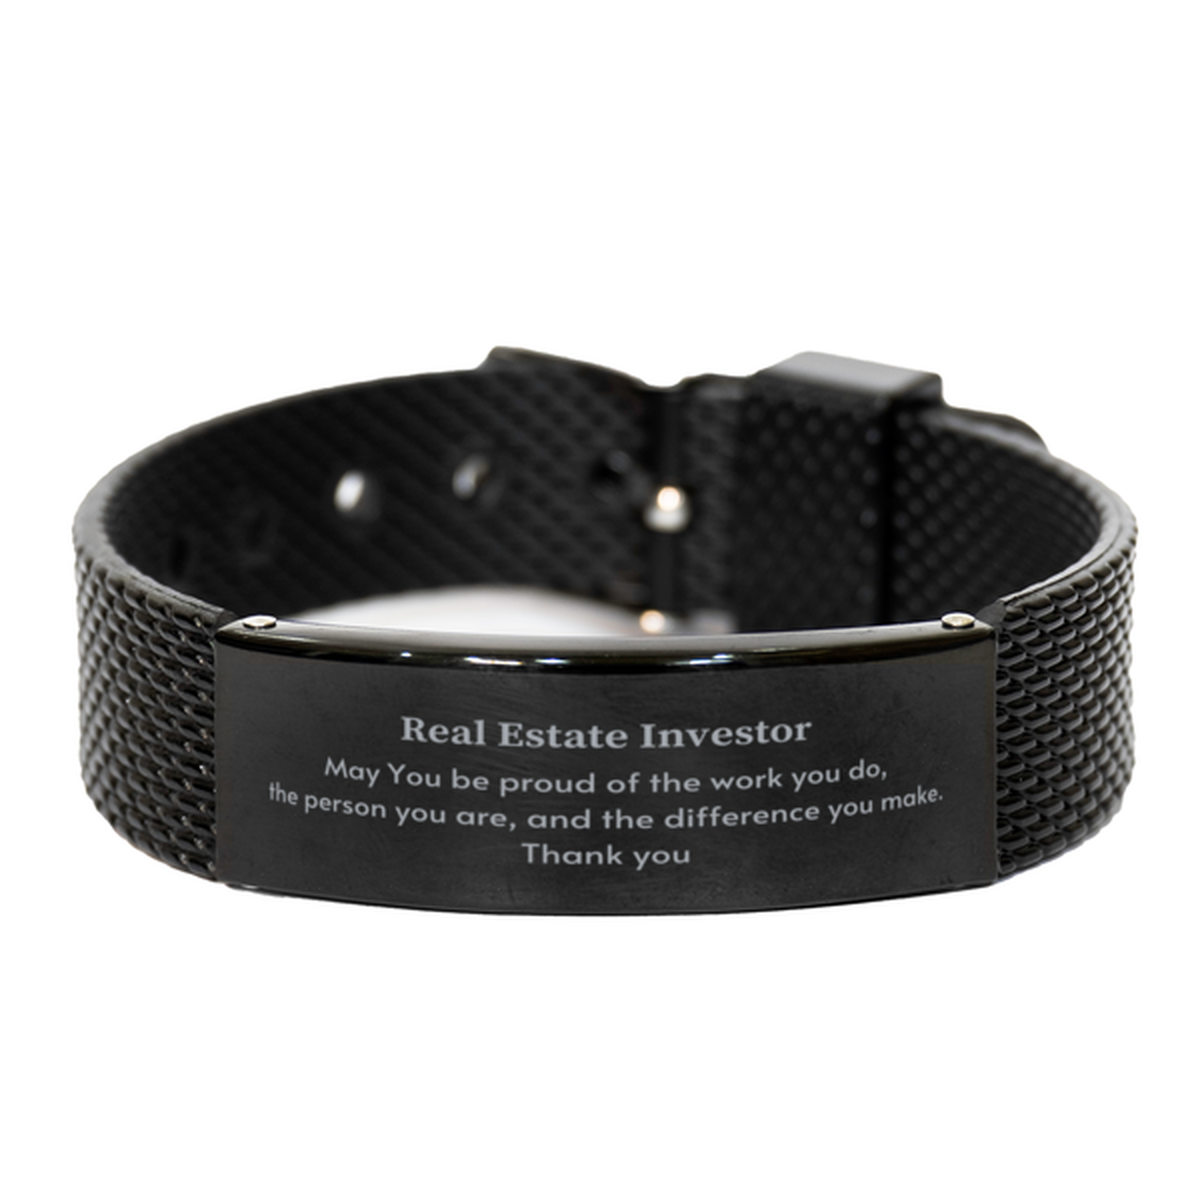 Heartwarming Black Shark Mesh Bracelet Retirement Coworkers Gifts for Real Estate Investor, Real Estate Investor May You be proud of the work you do, the person you are Gifts for Boss Men Women Friends